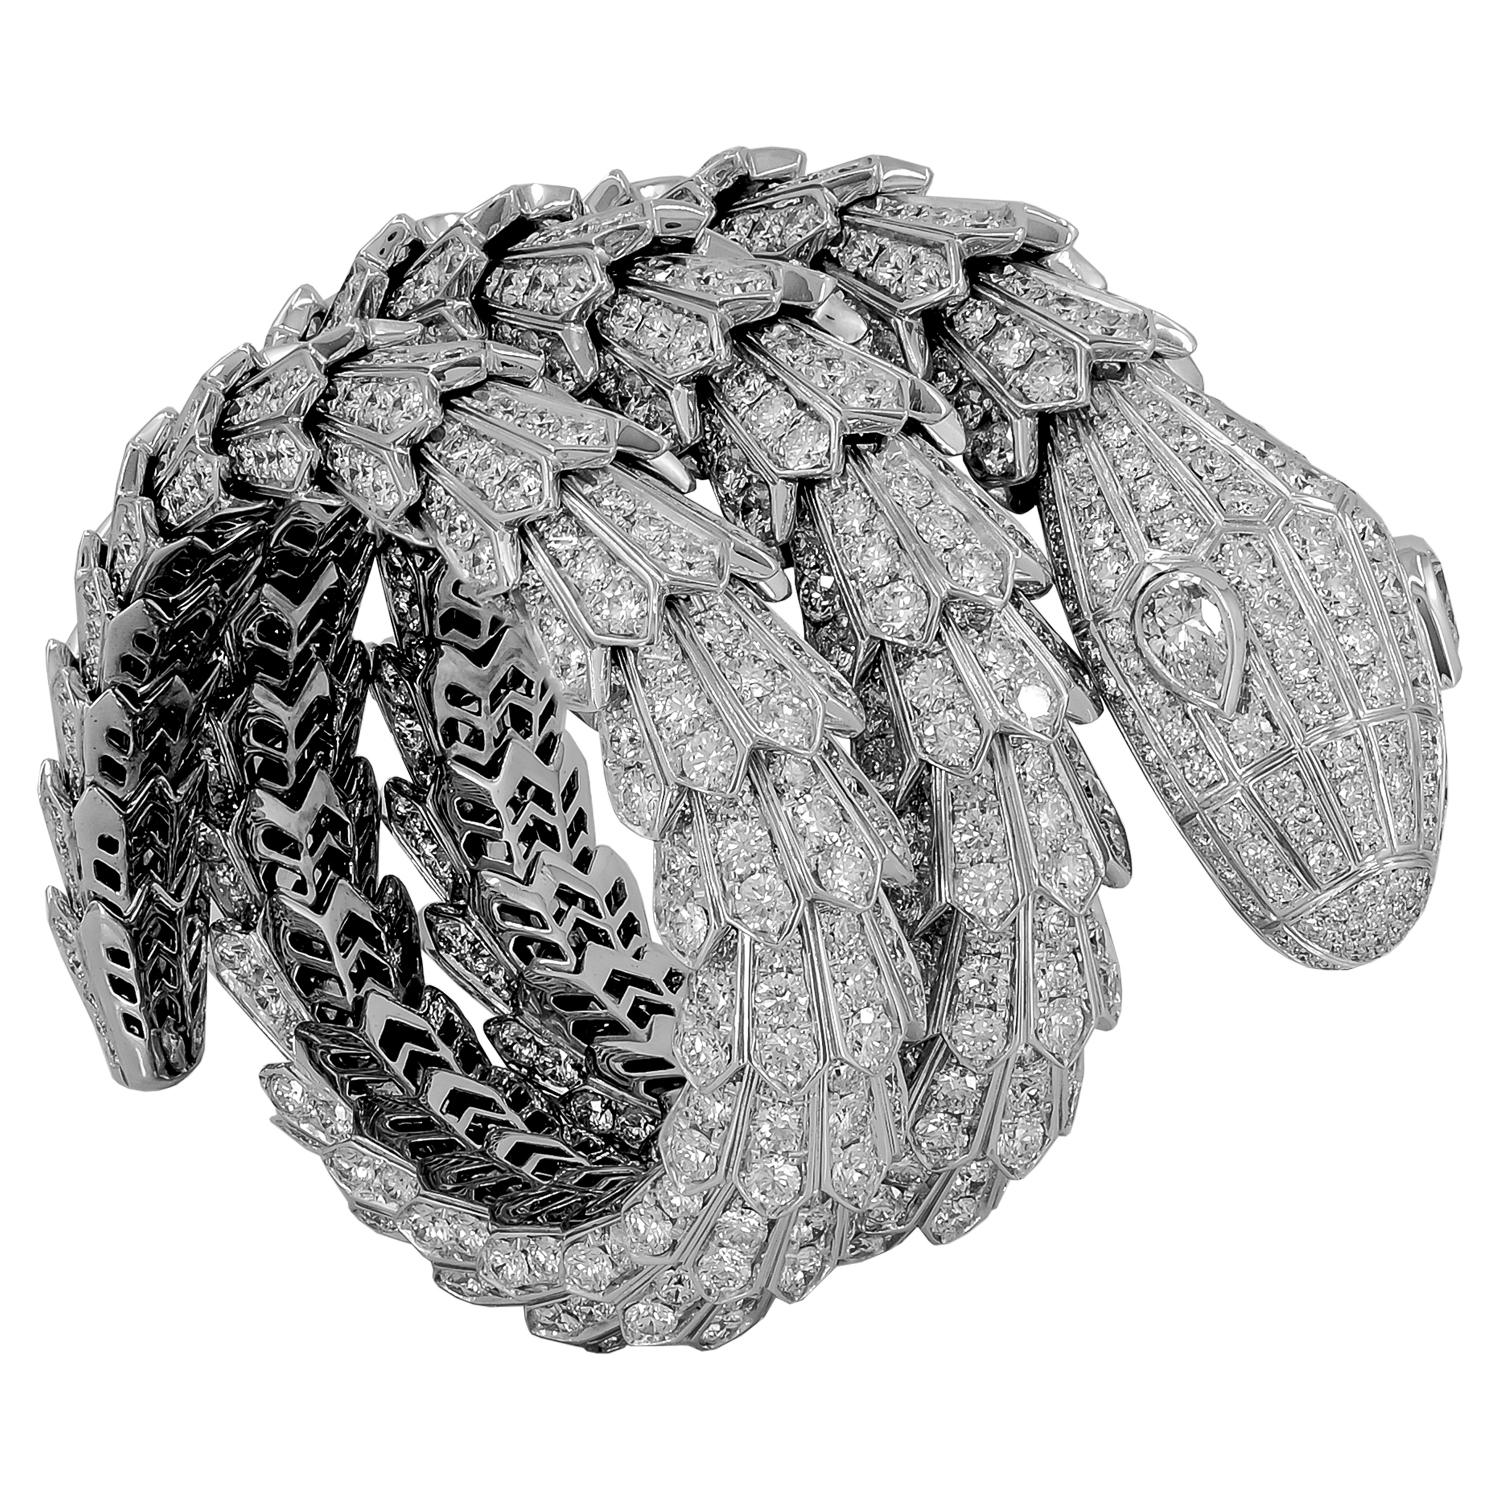 A magnificent 18k white gold Serpenti bracelet that captures the power and essence of seduction through the iconic Bulgari serpent, which sensually coils around the wrist exposing its pavé round brilliant cut diamond scales weighing approximately